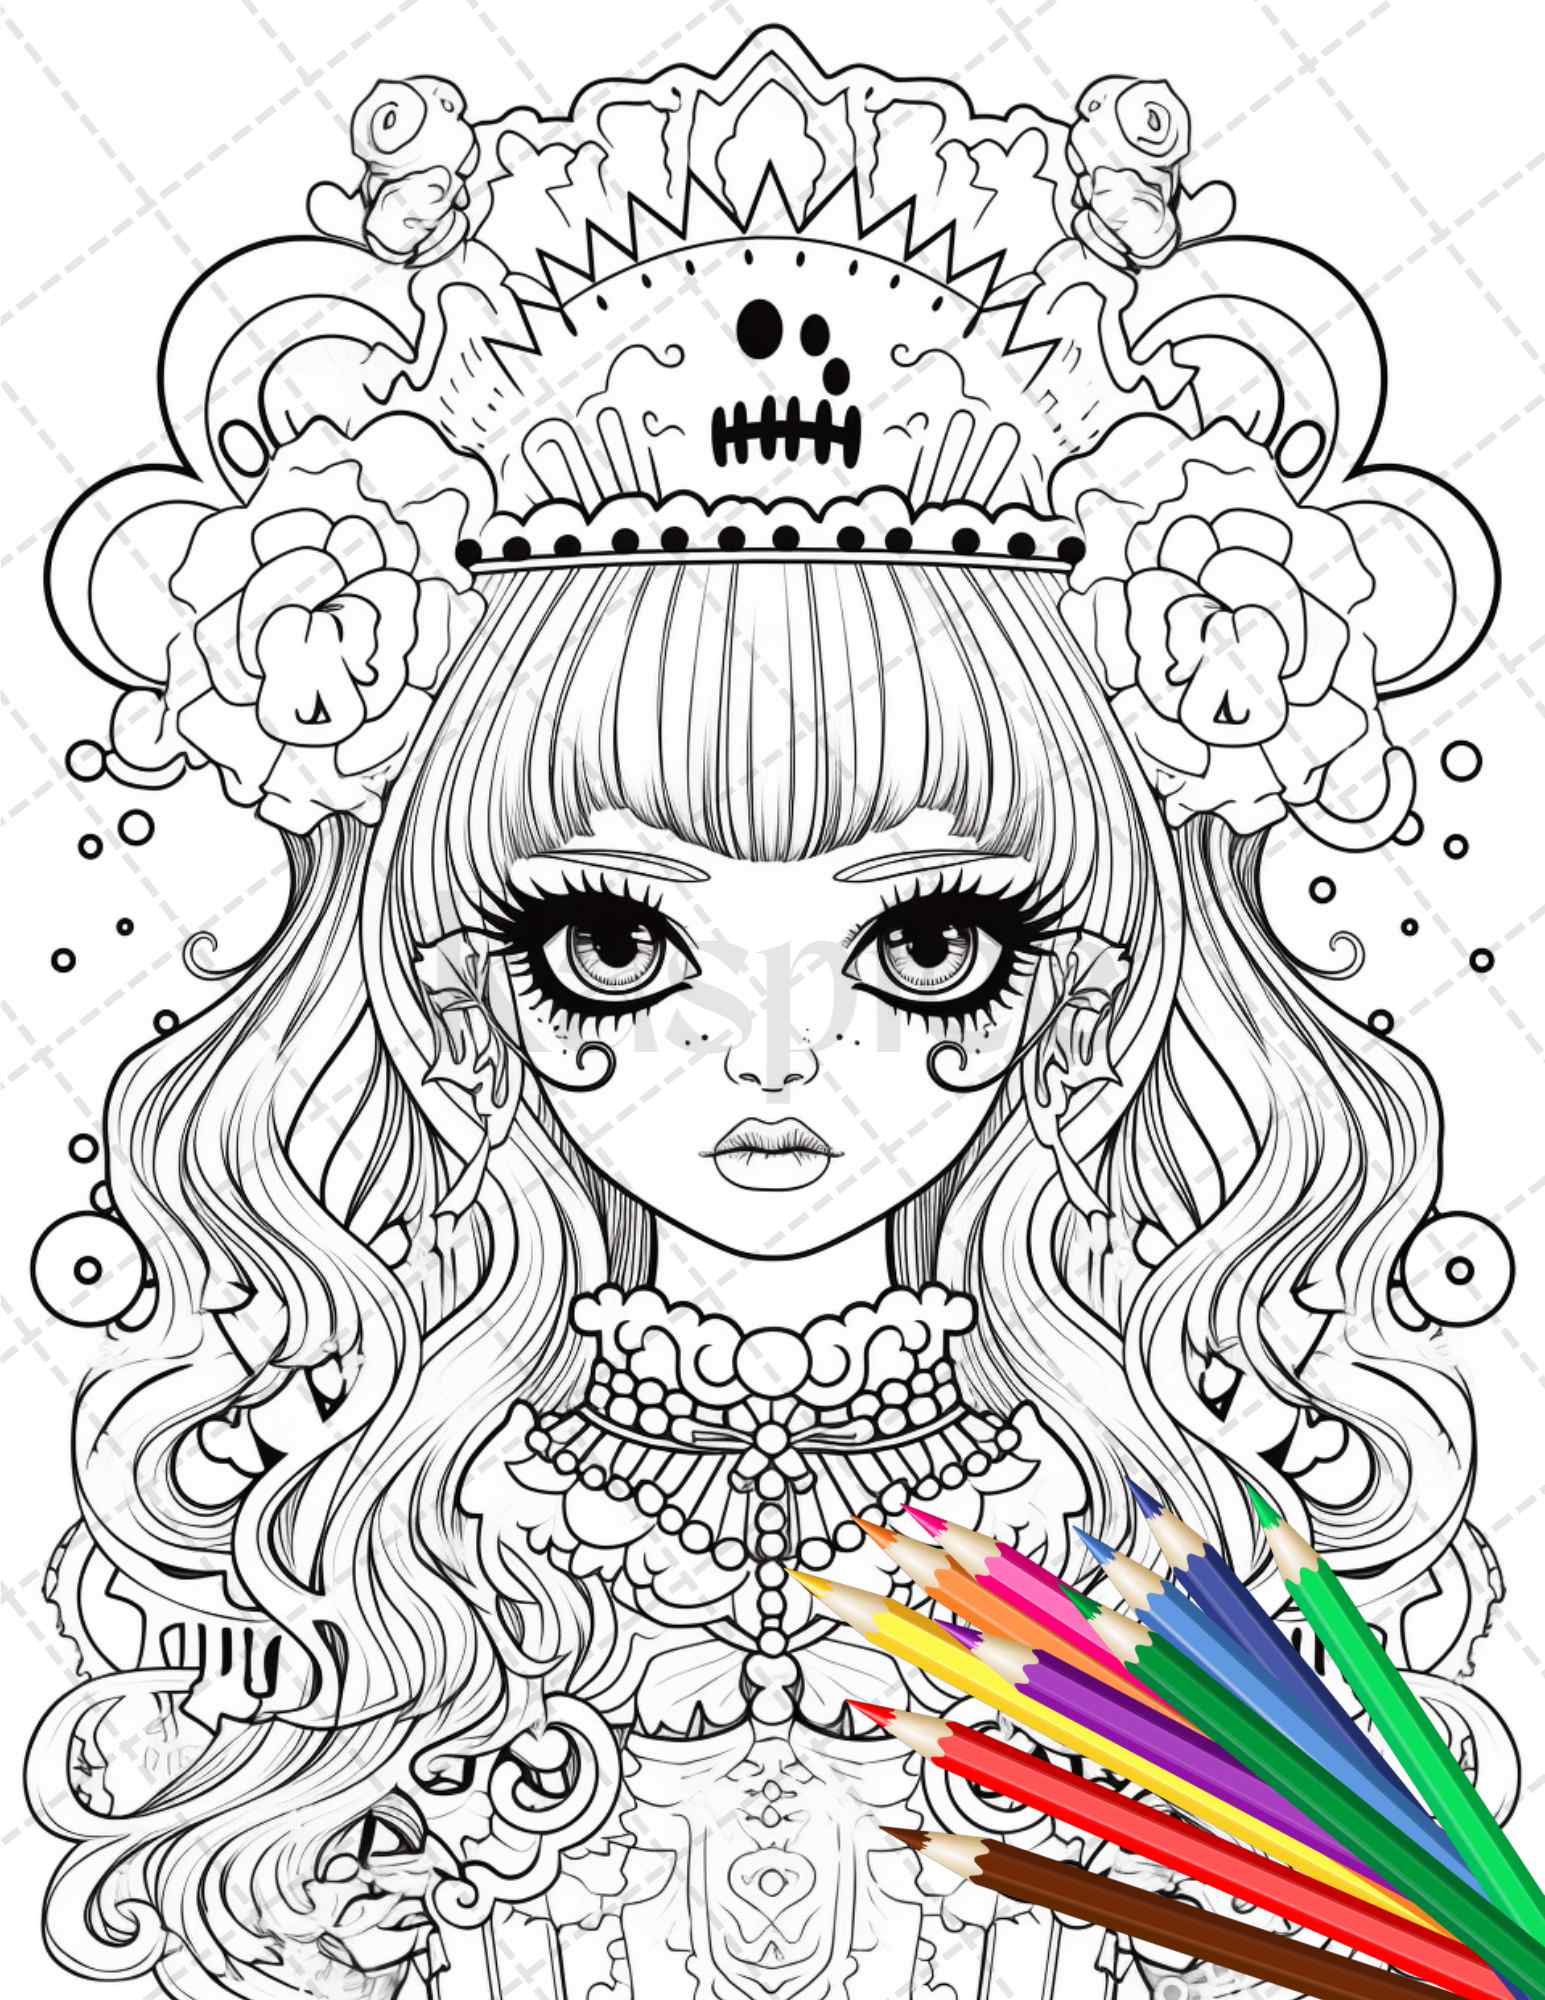 32 Creepy Kawaii Pastel Goth Coloring Pages Printable for Adults, Grayscale Coloring Page, PDF File Instant Download - raspiee